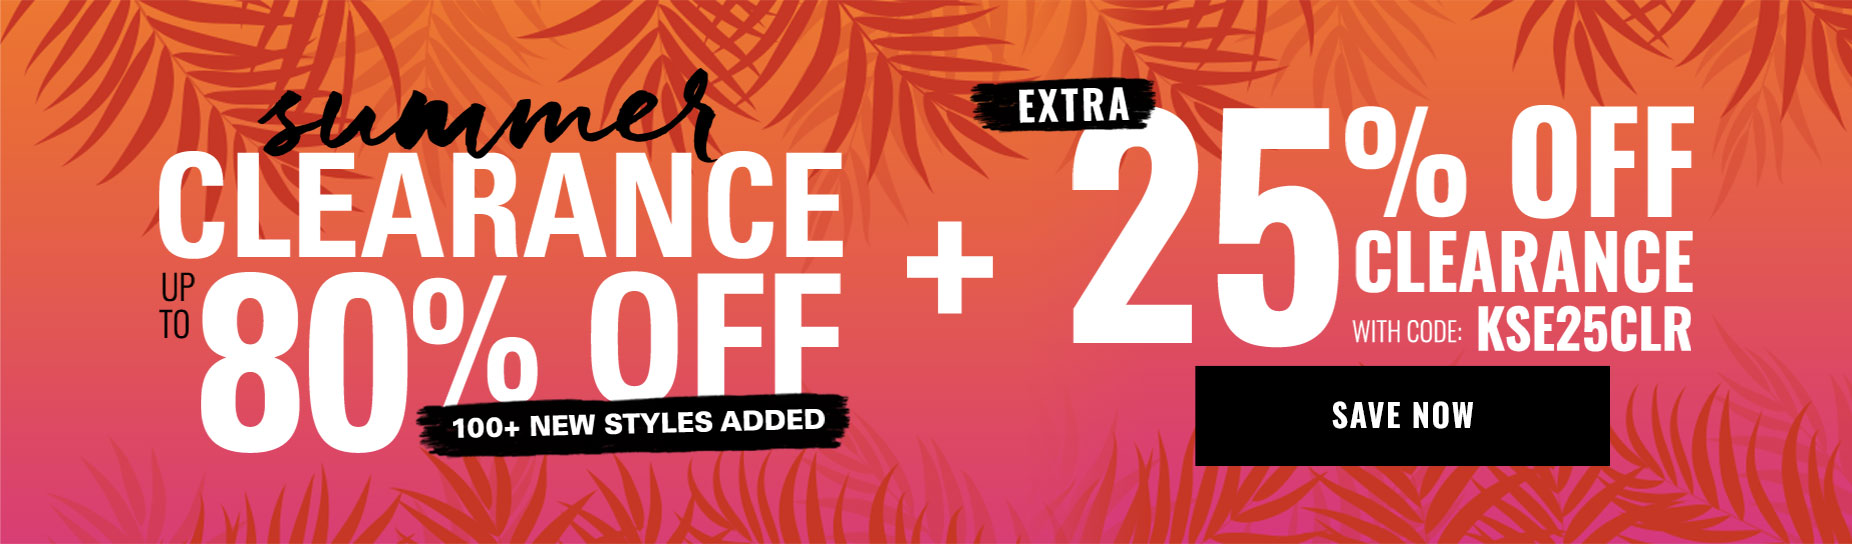 summer clearance up to 80% off